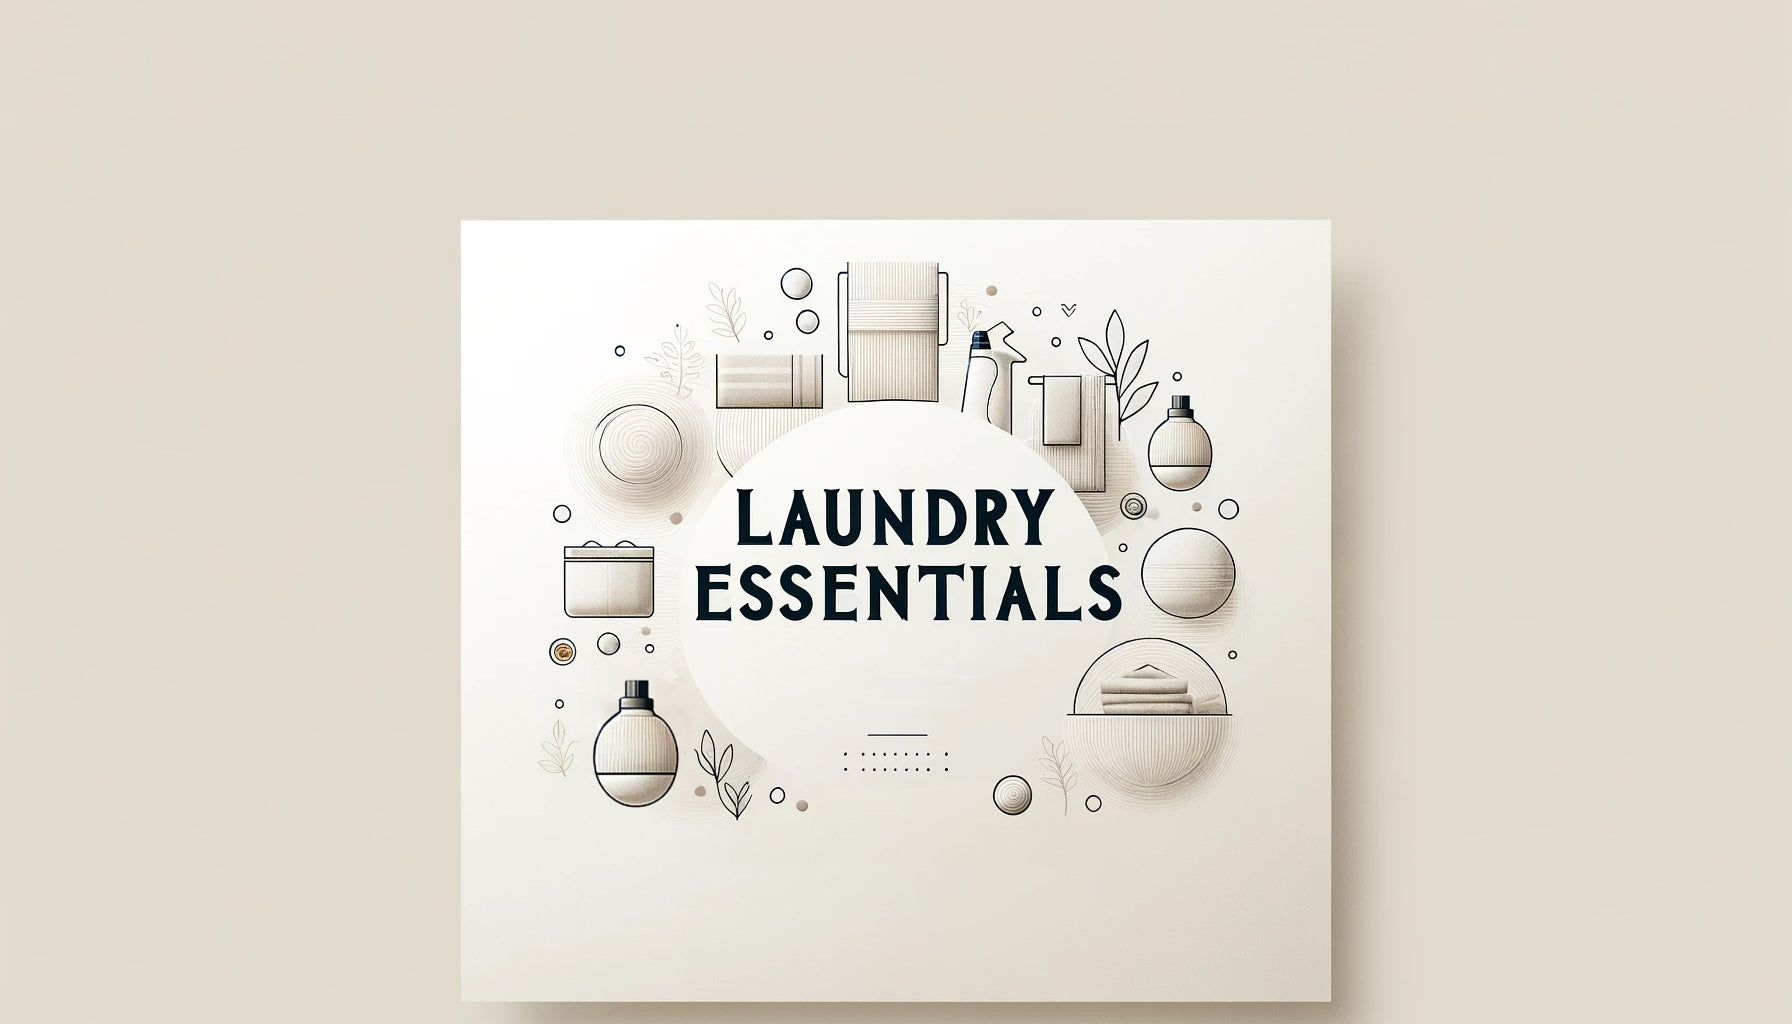 "Upgrade your laundry routine with our 'Laundry Essentials' collection.